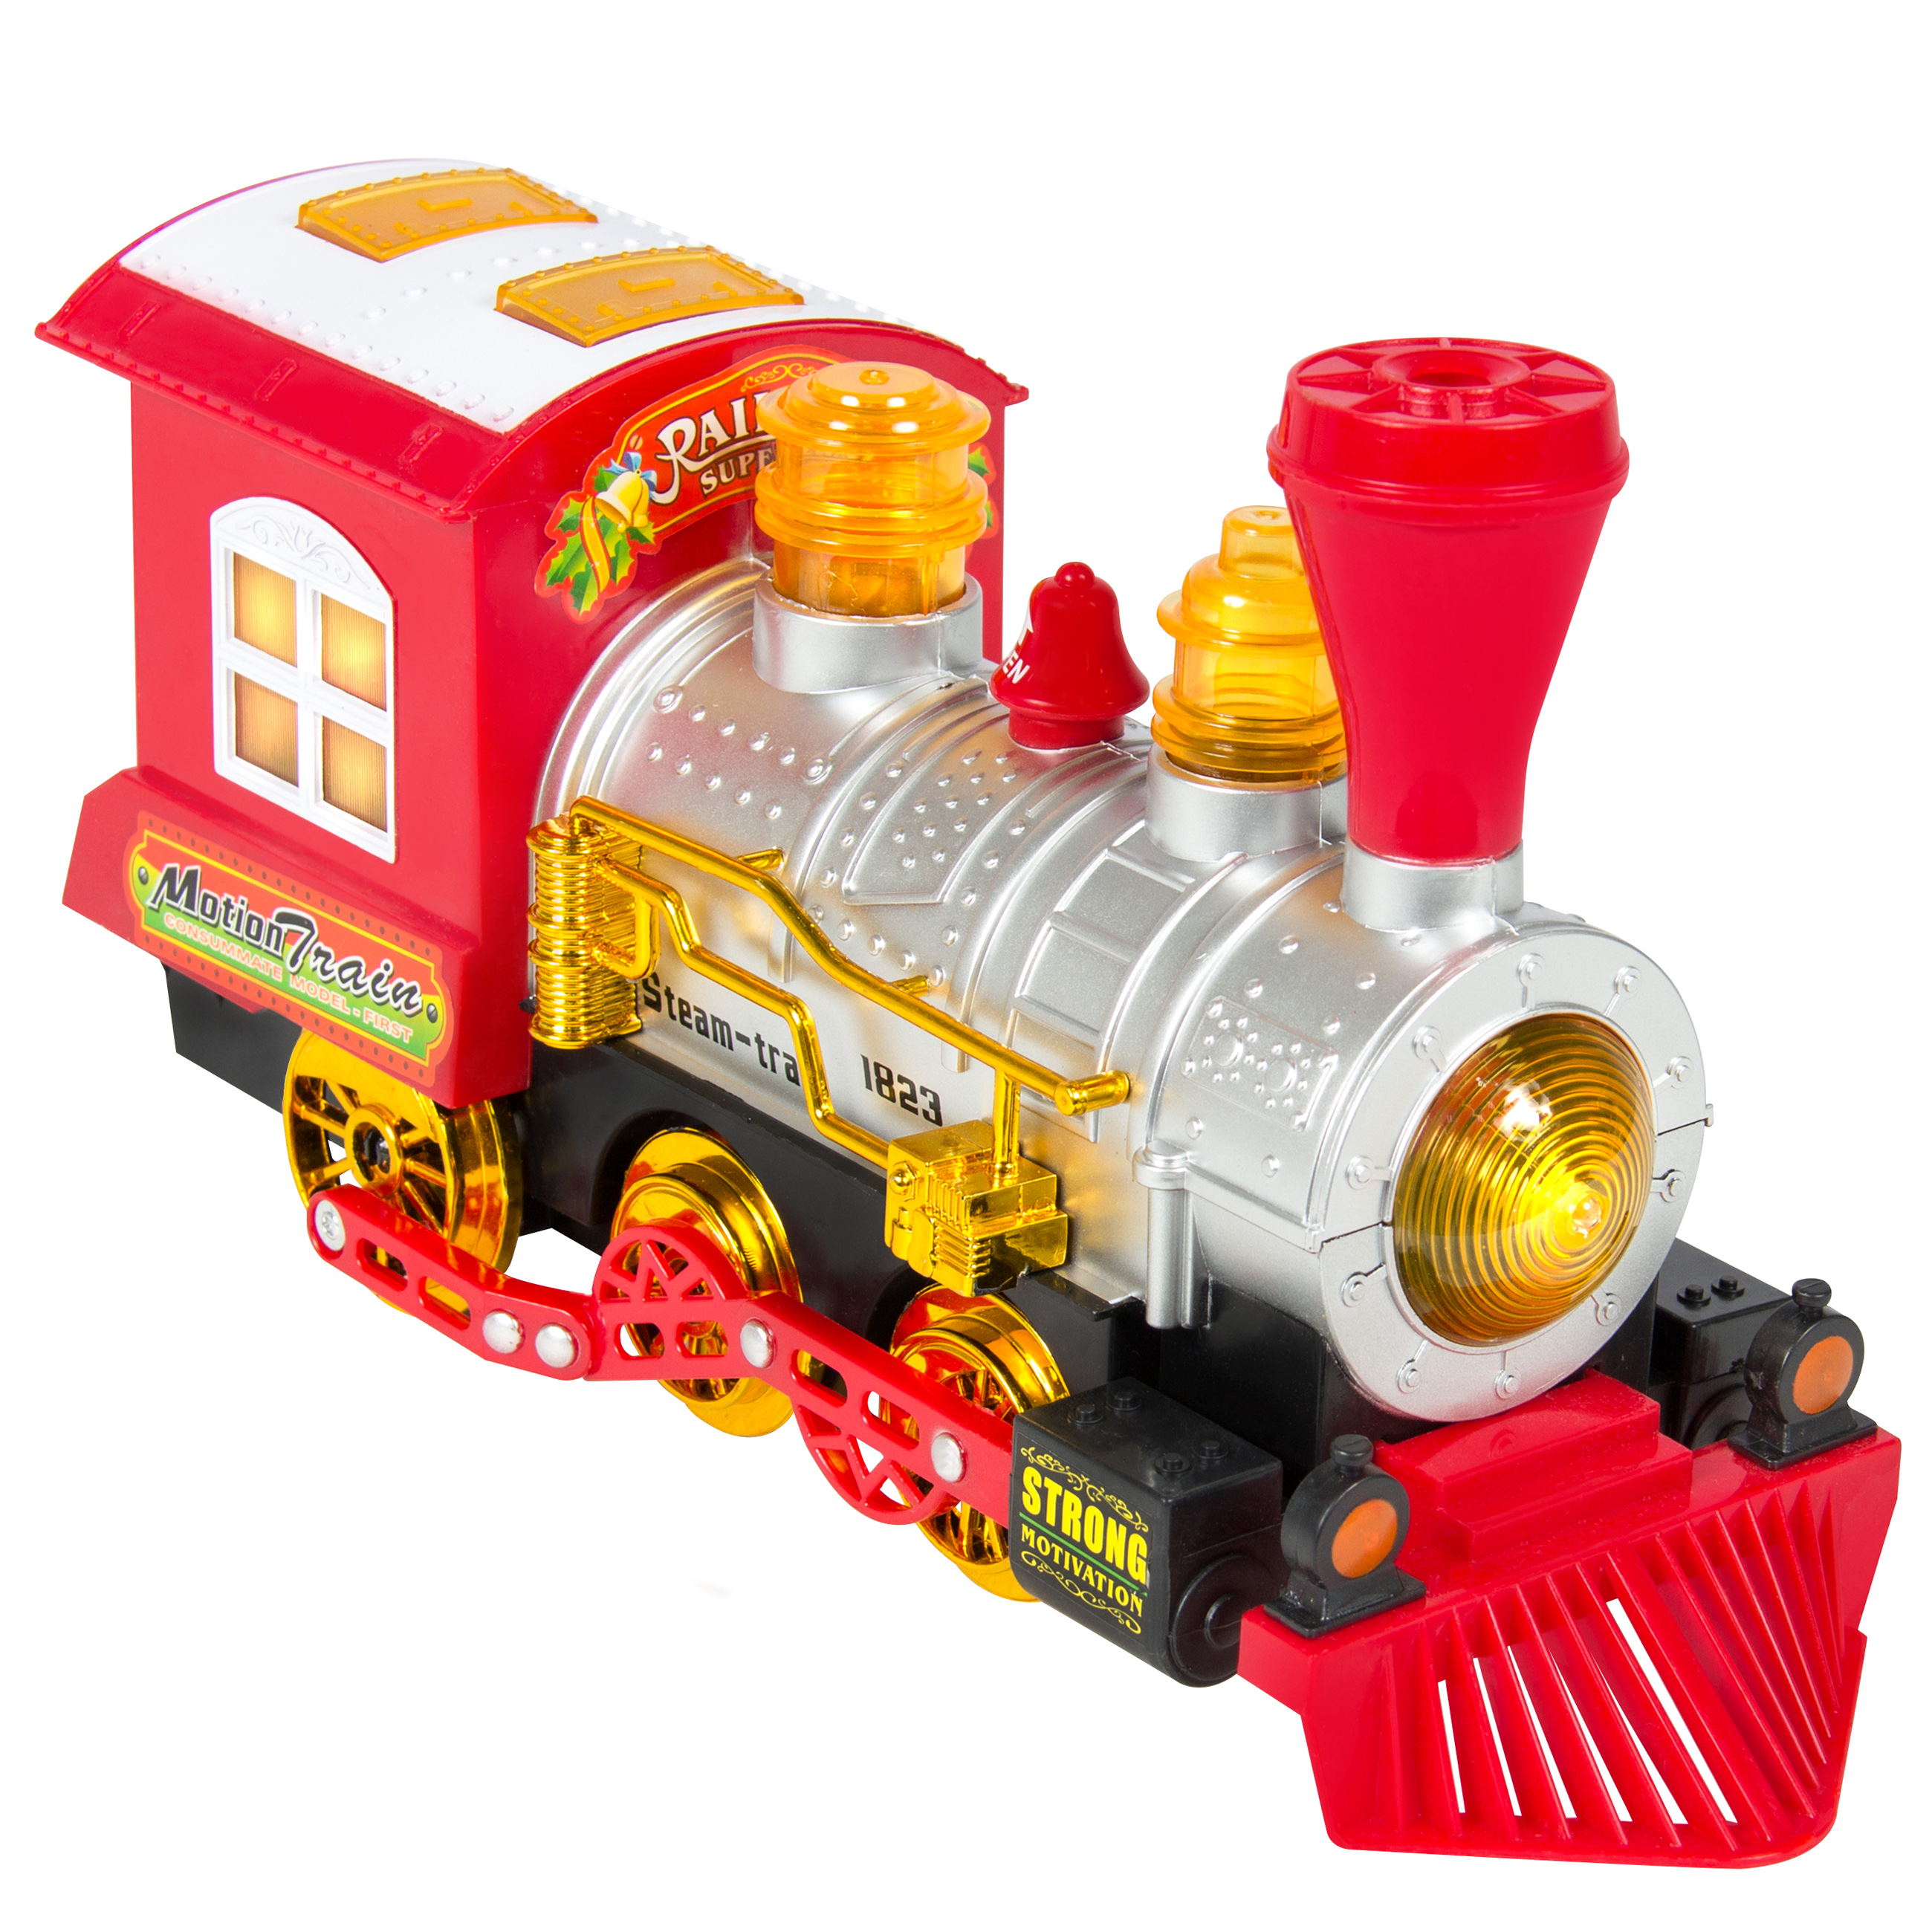 train gifts for toddlers